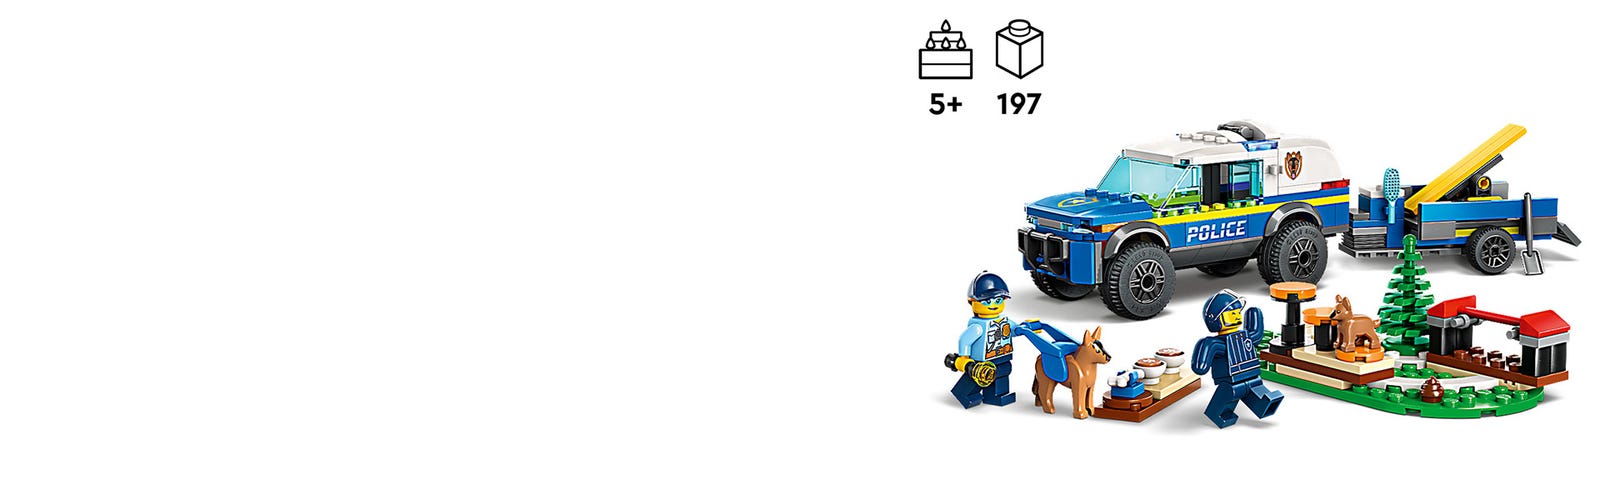 60369 online | LEGO® Shop at Official Dog US | City Police Buy the Training Mobile